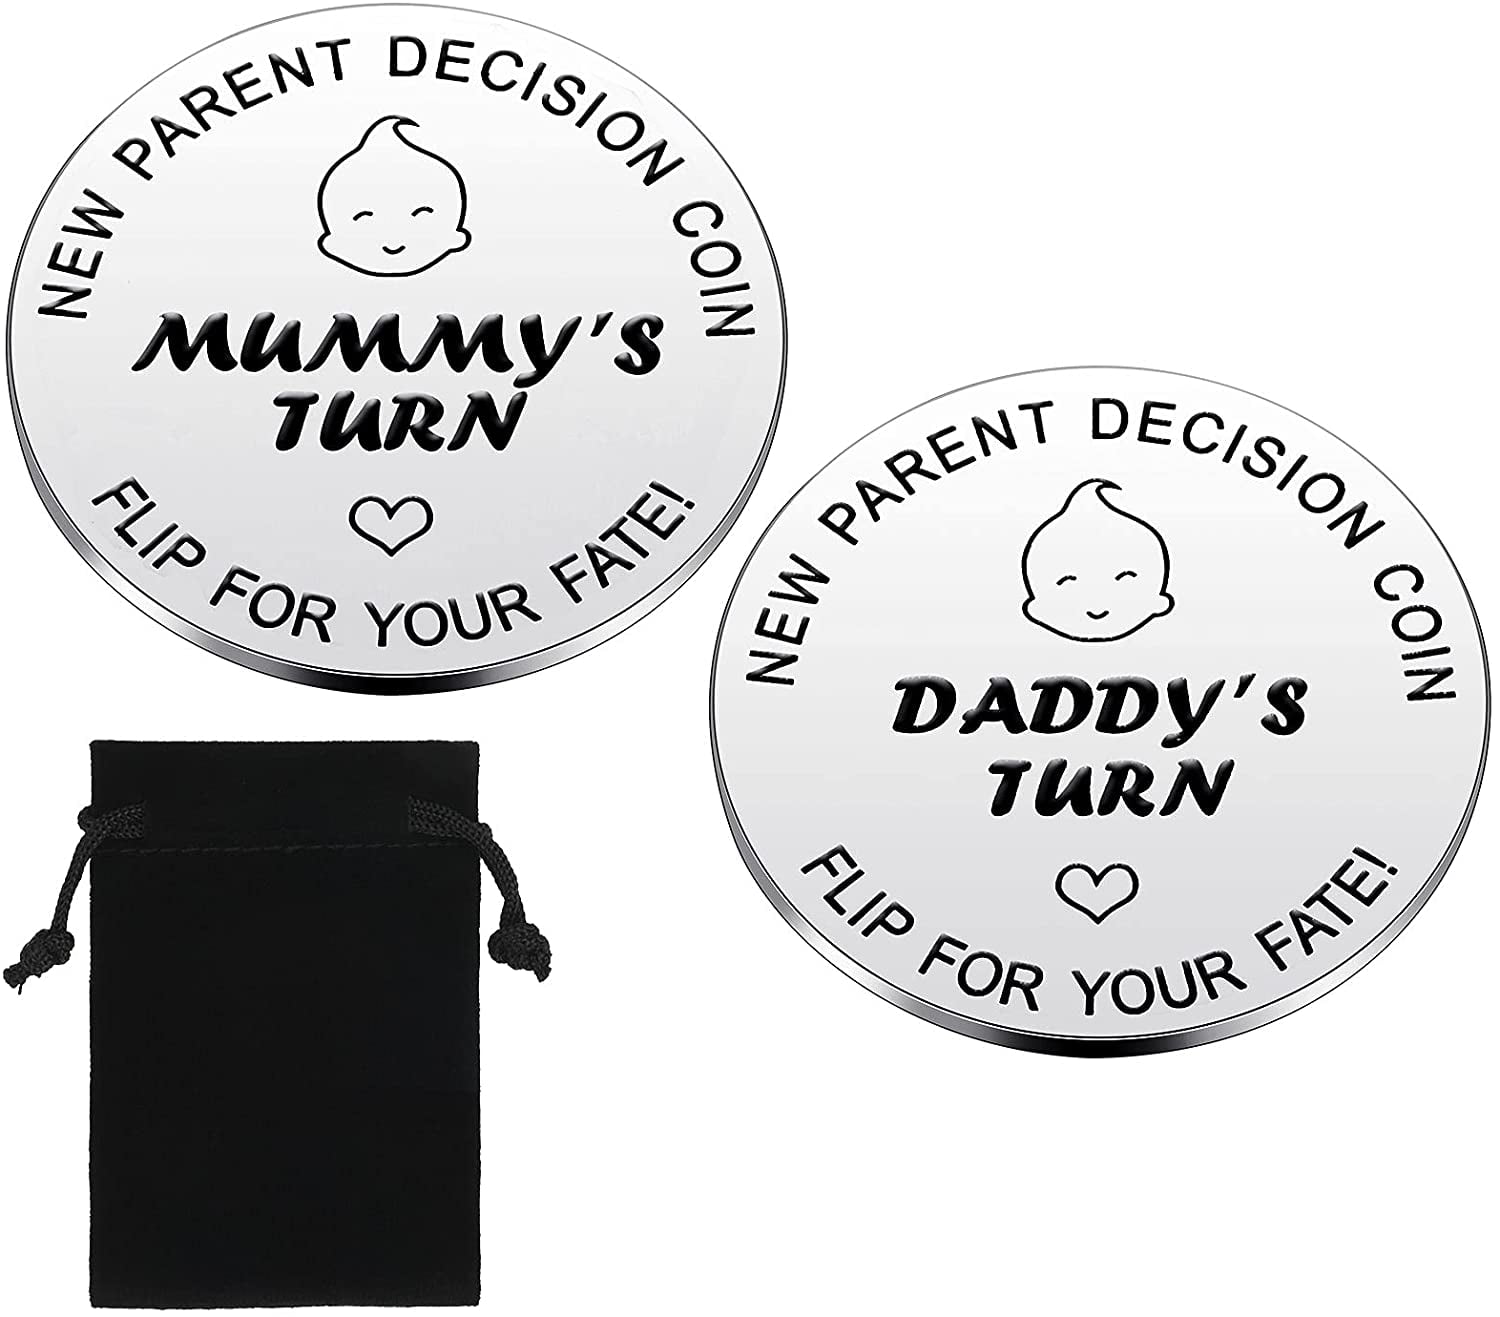 Funny Parent Decision Turn Coin,Gifts for New Baby Gifts for Daddy Mum